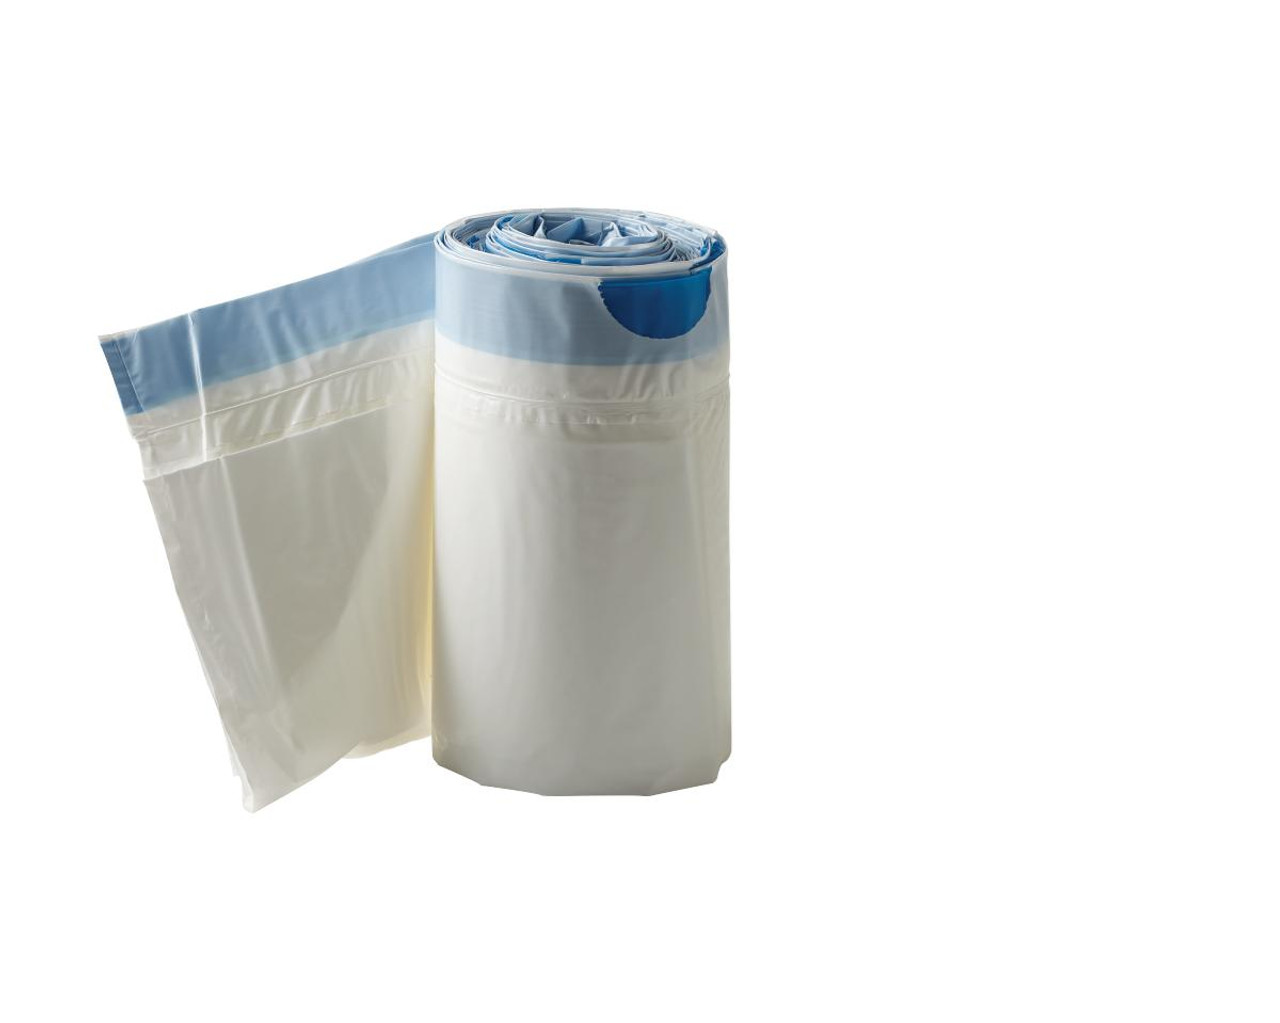 Commode Liners with Absorbent Pads